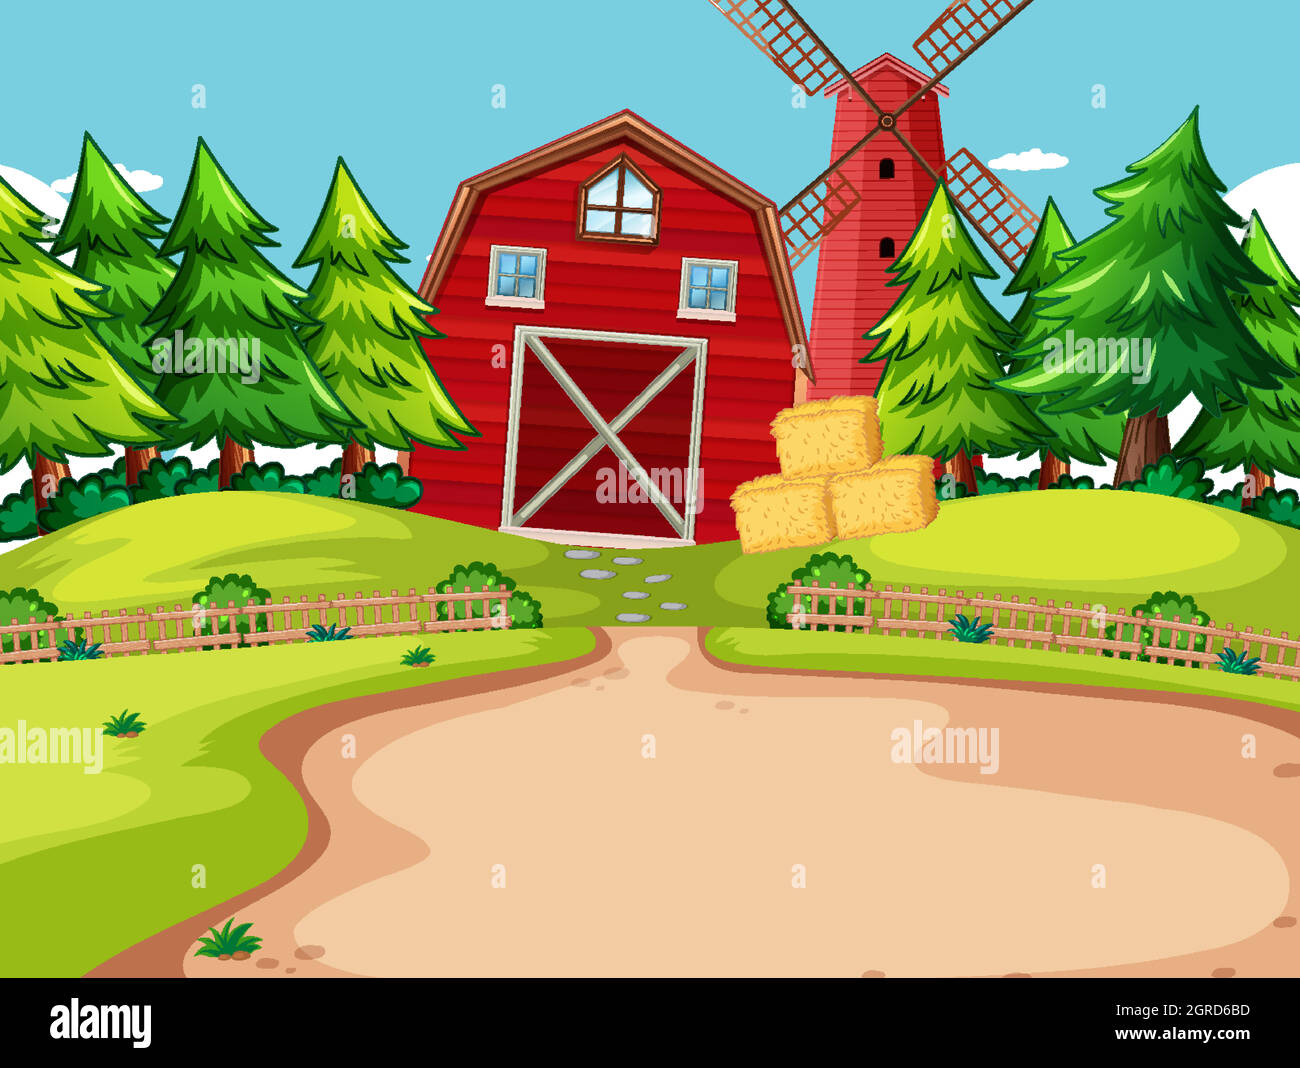 Background scene with red barn and windmill in the farm Stock Vector